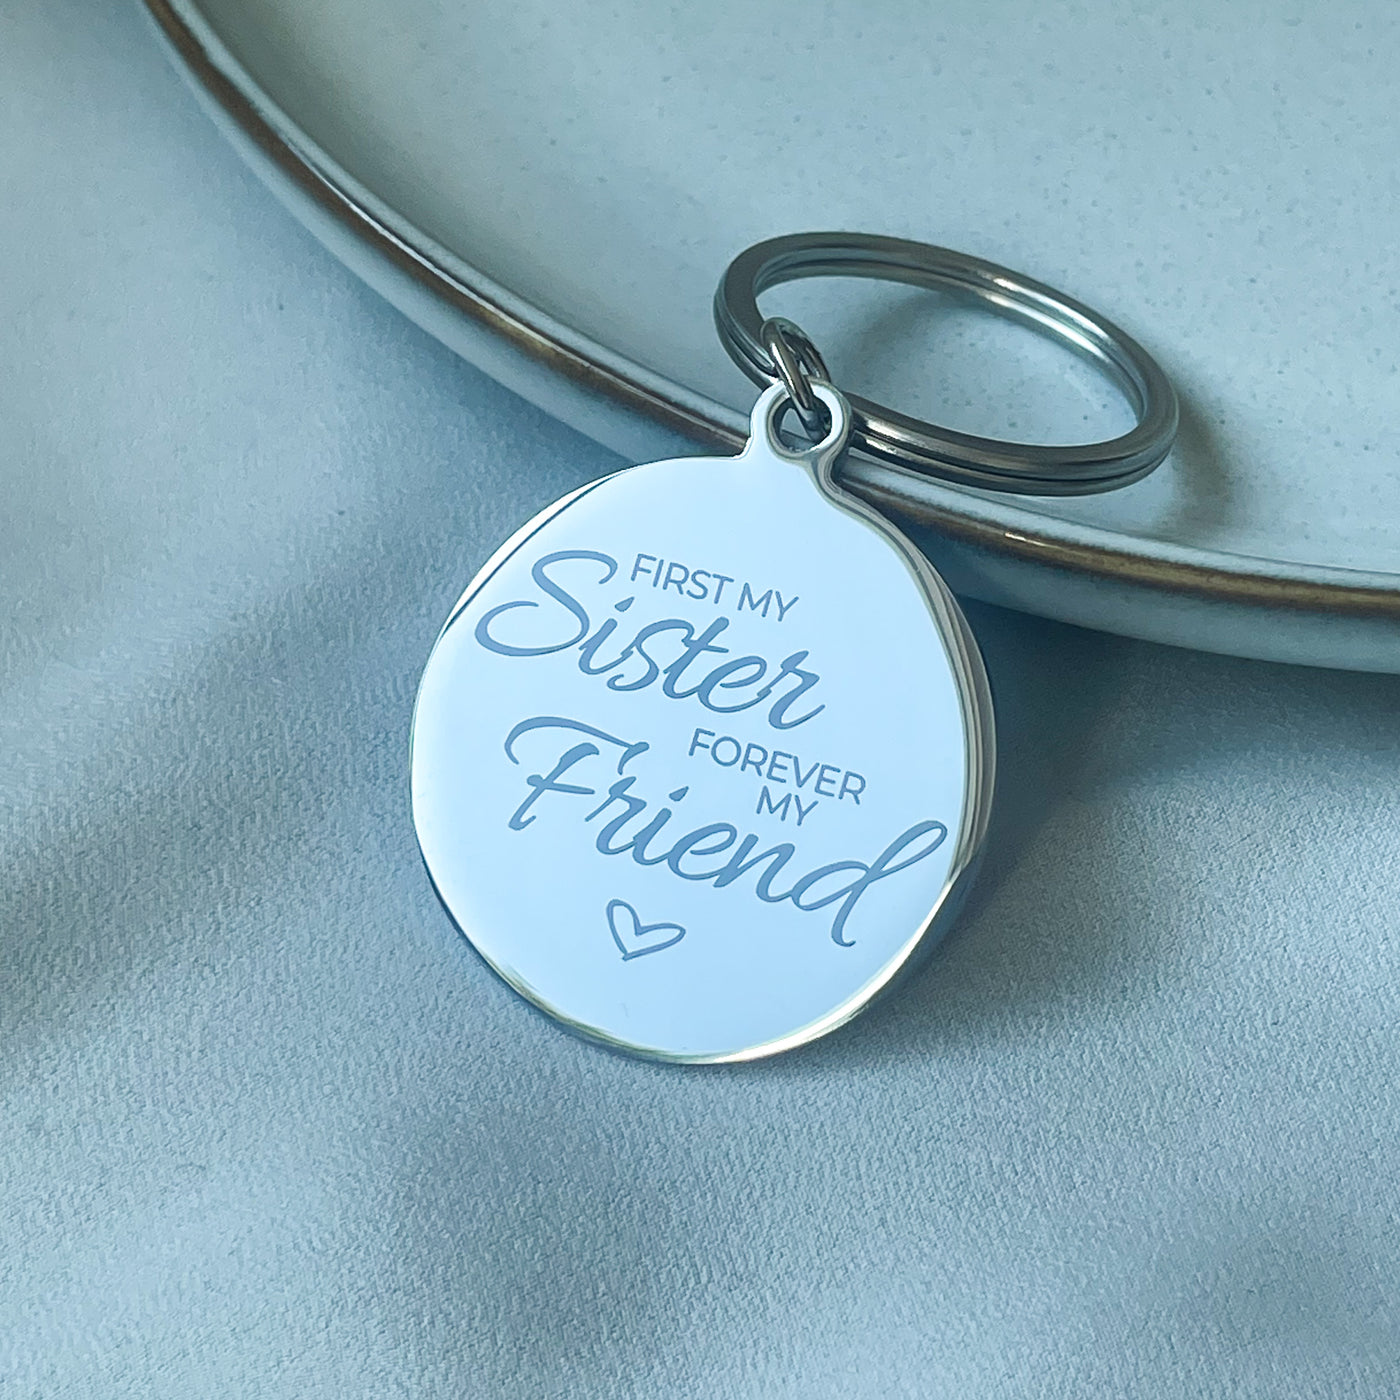 KEYCHAIN - "FIRST MY SISTER, FOREVER MY FRIEND"